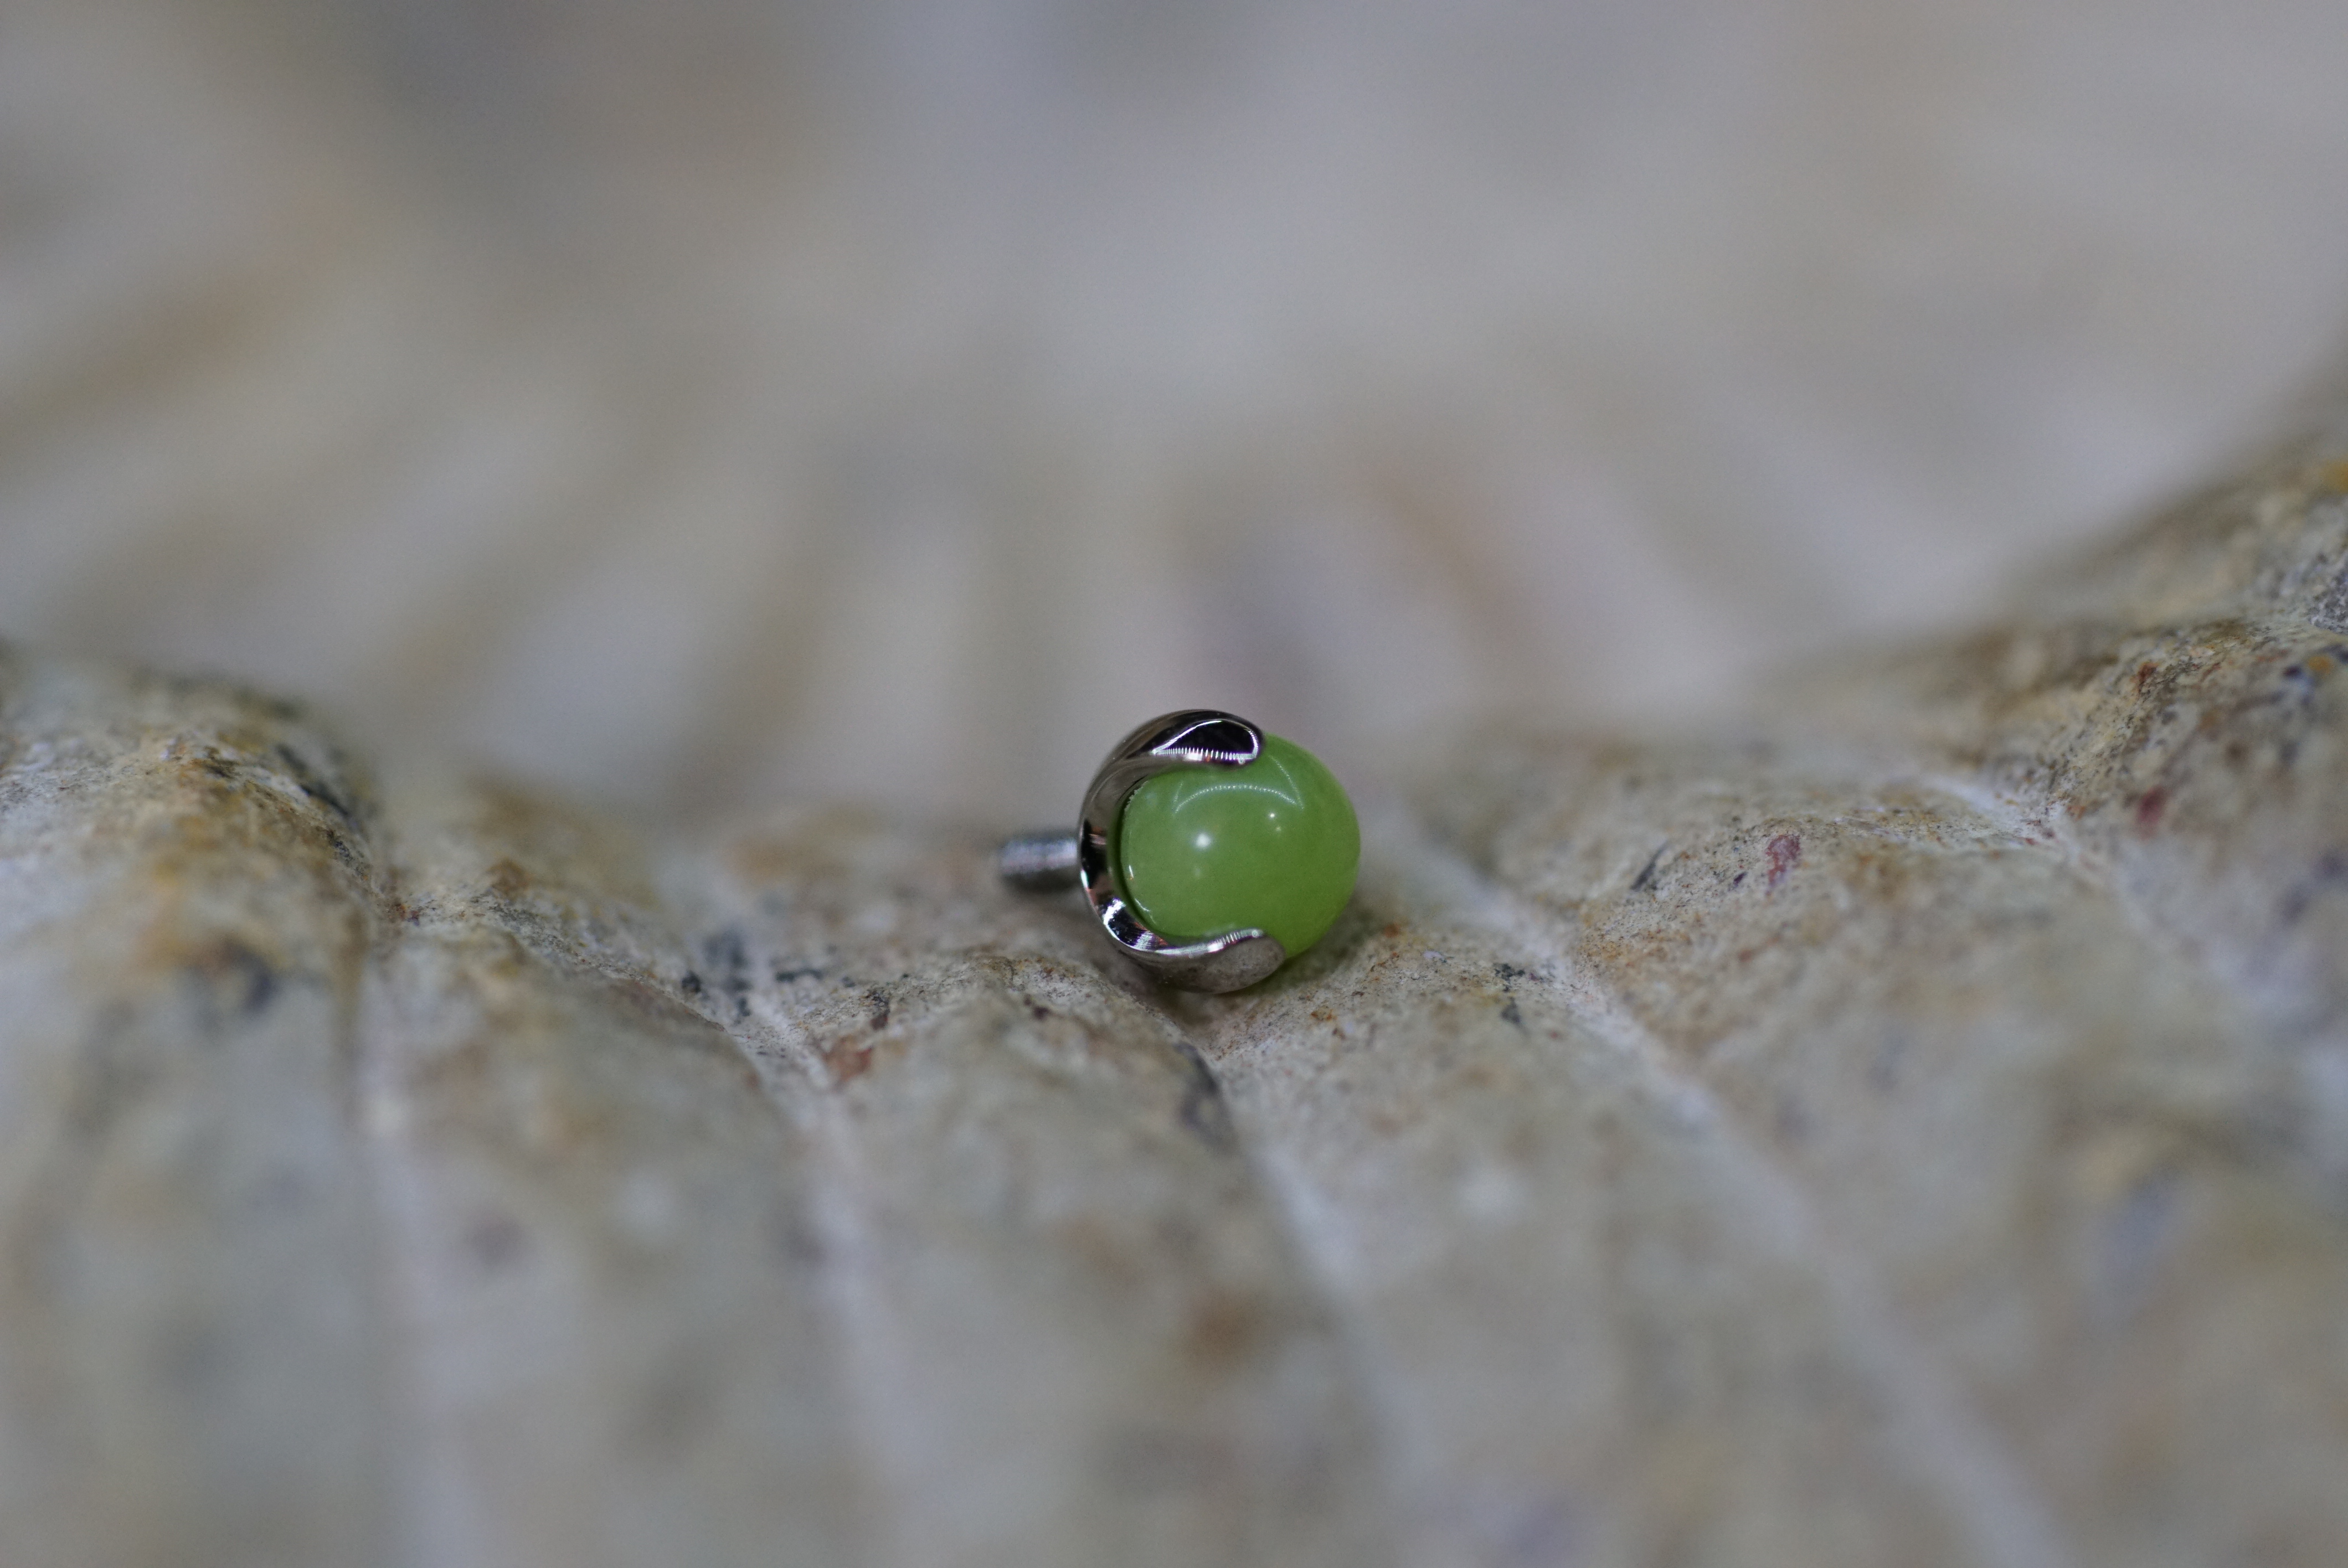 3mm Claw Prong Ball (Option: 18/16g threaded Jade 3mm)